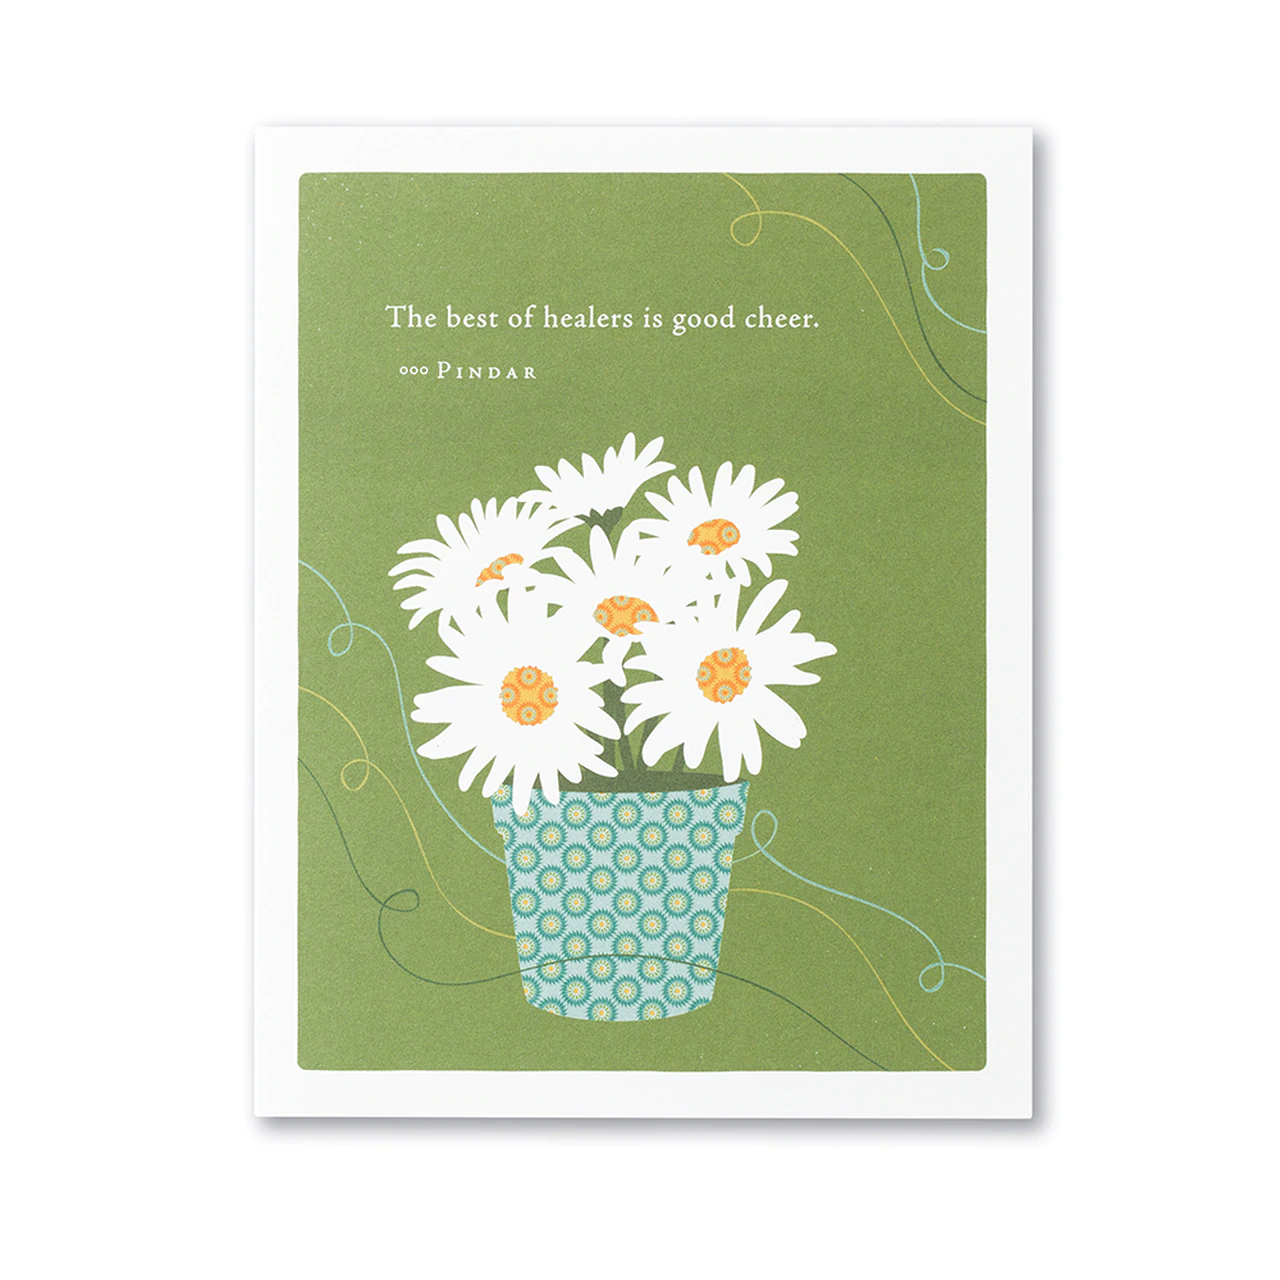 Positively Green Greeting Card - Get Well - "The best of healers is good cheer." by Pindar - Mellow Monkey